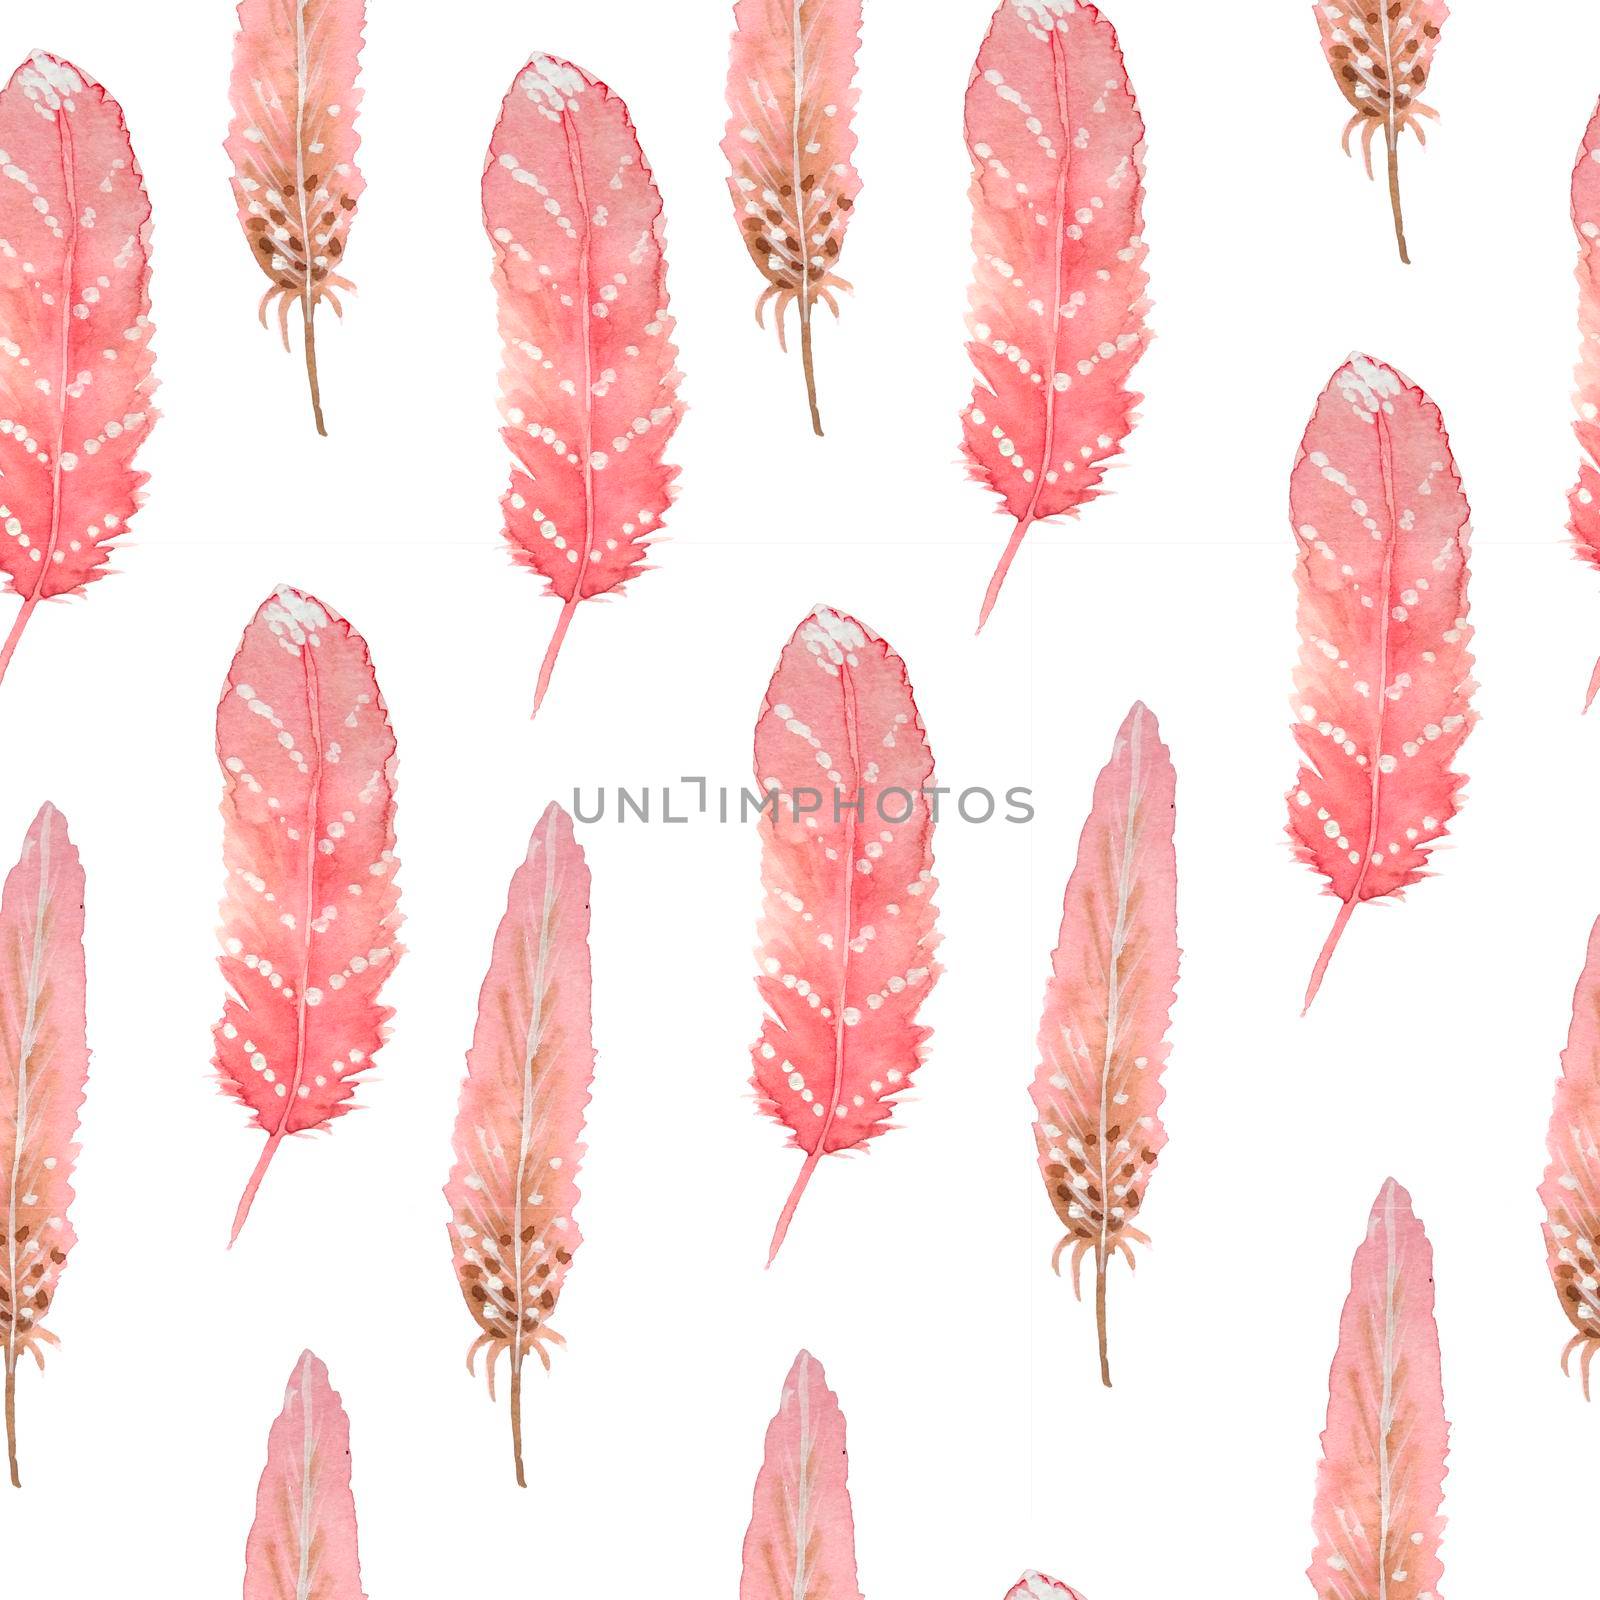 Watercolor seamless pattern with pink and brown boho bohemian feathers. Tribal tribe traditional design. Neutral elegant colors for graphic decor wallpapers wrapping paper textile